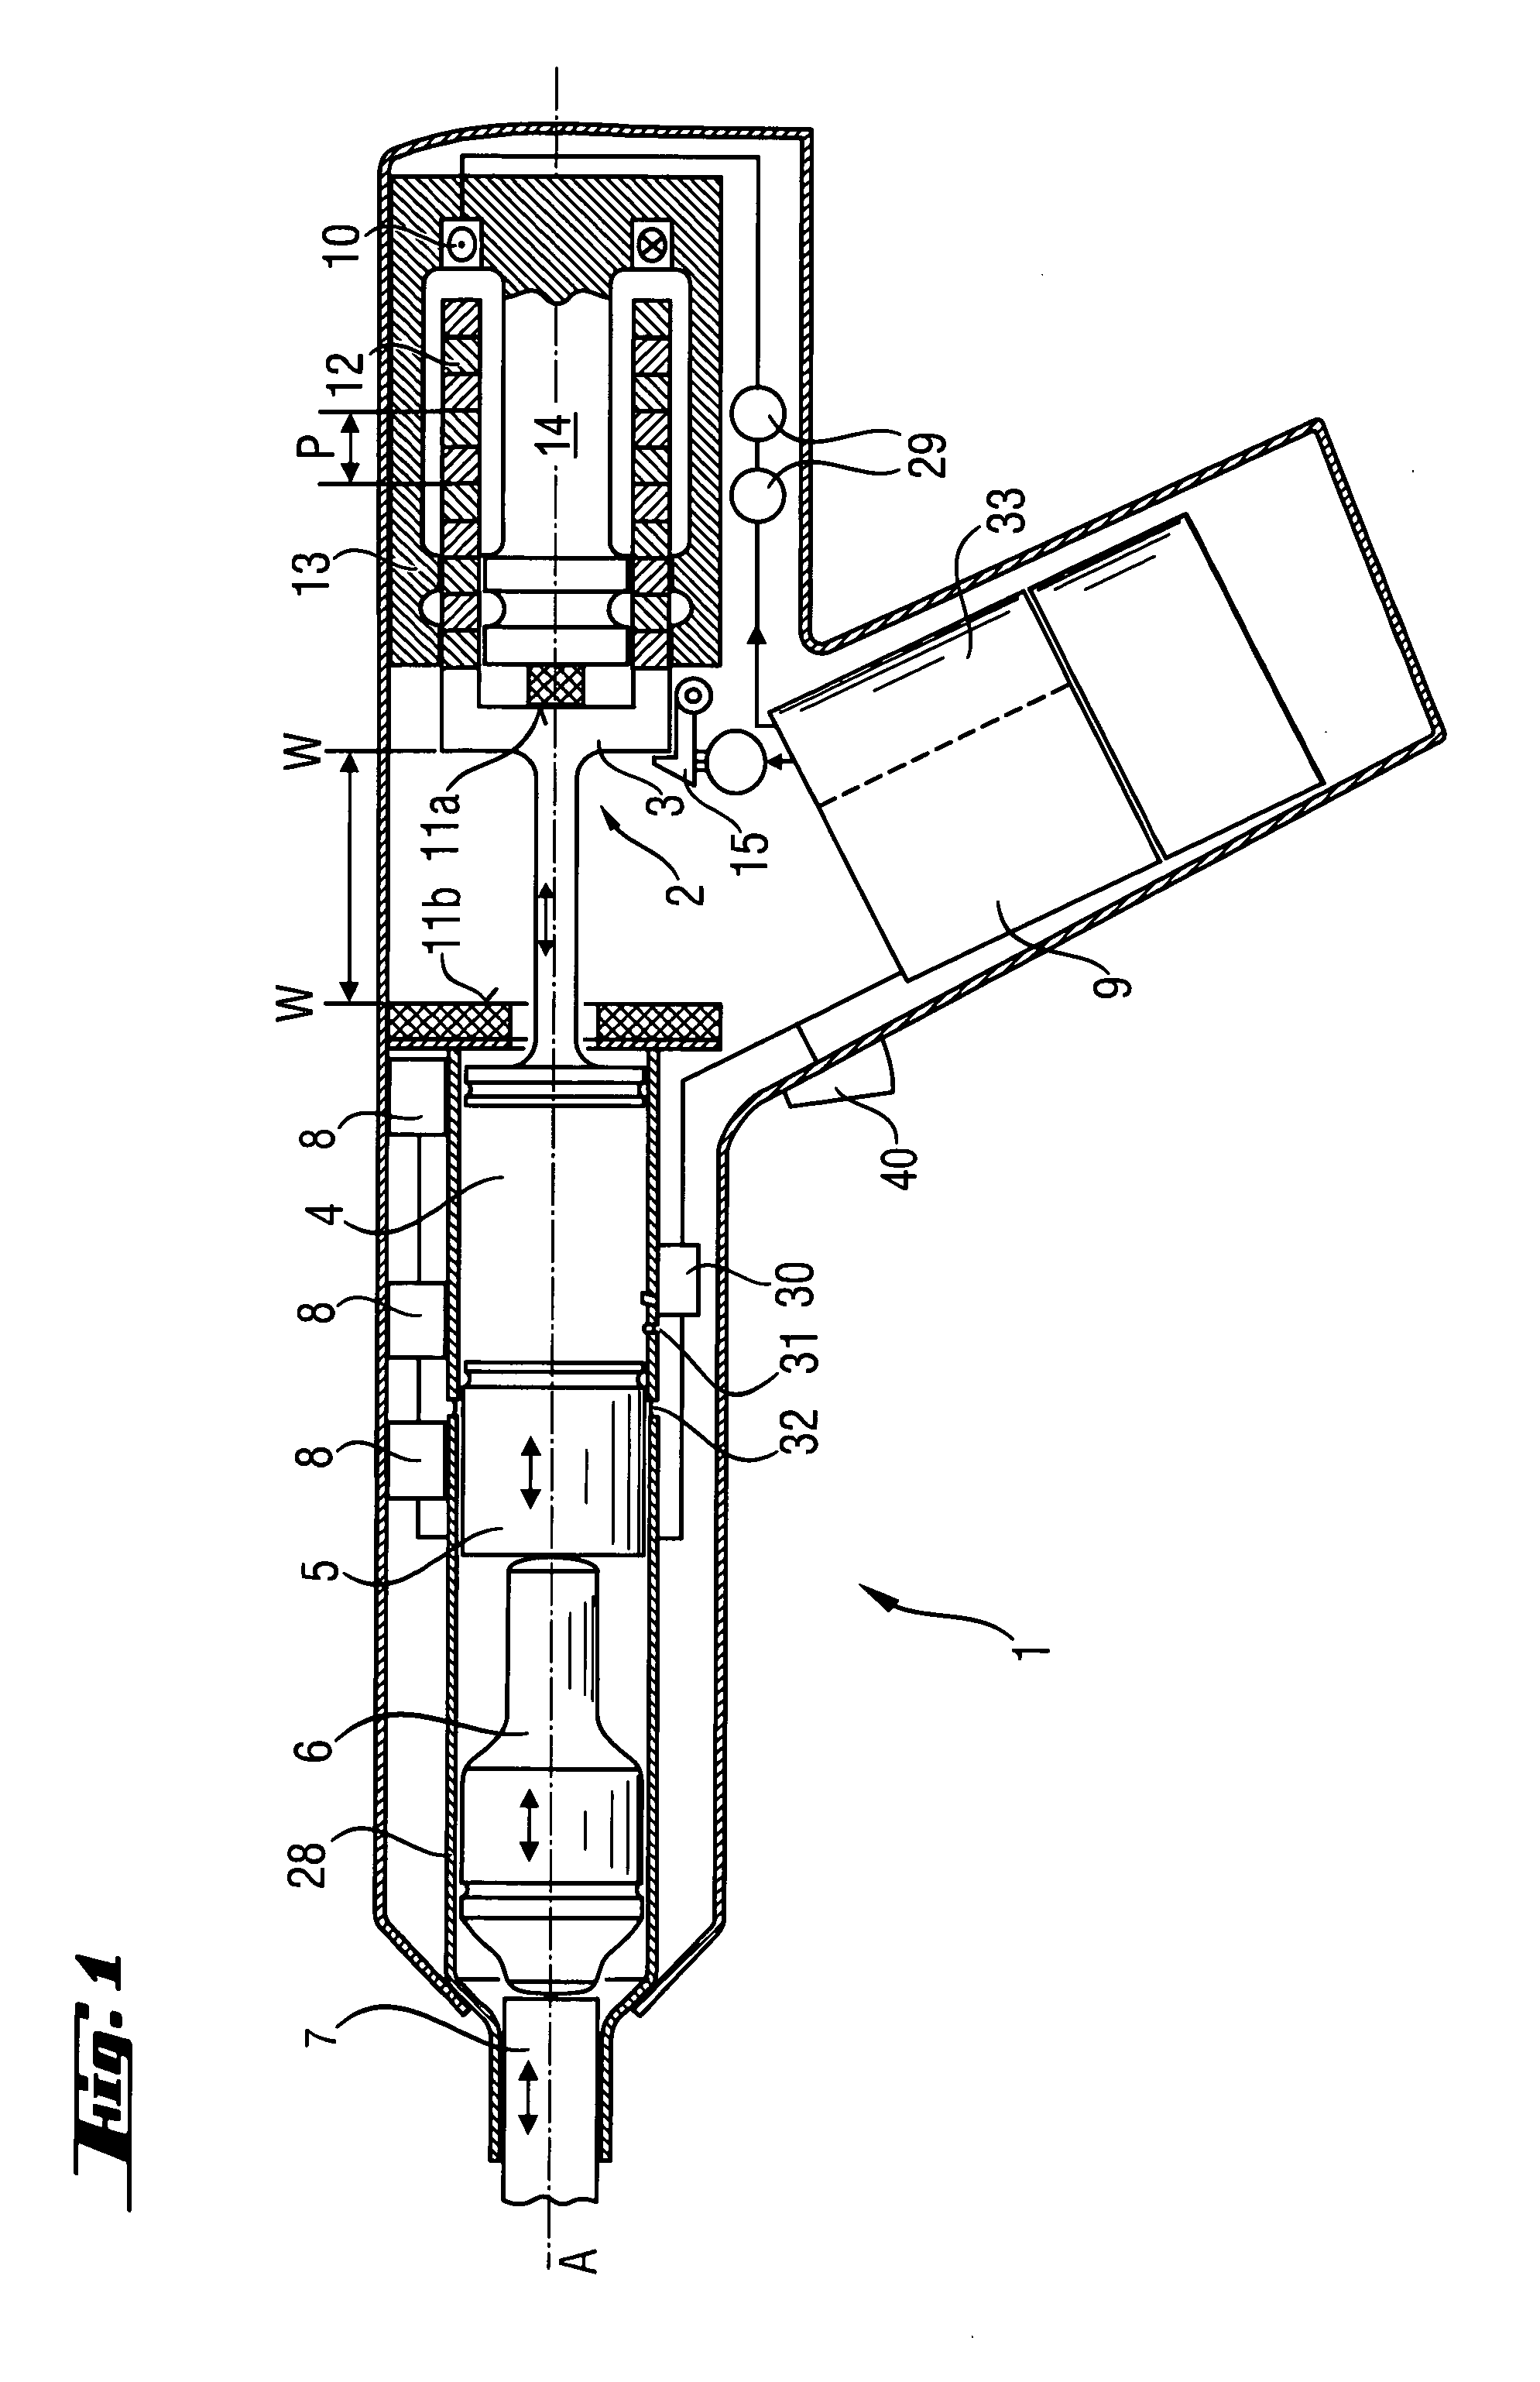 Hand-held power tool with air spring percussion mechanism, linear motor, and control process